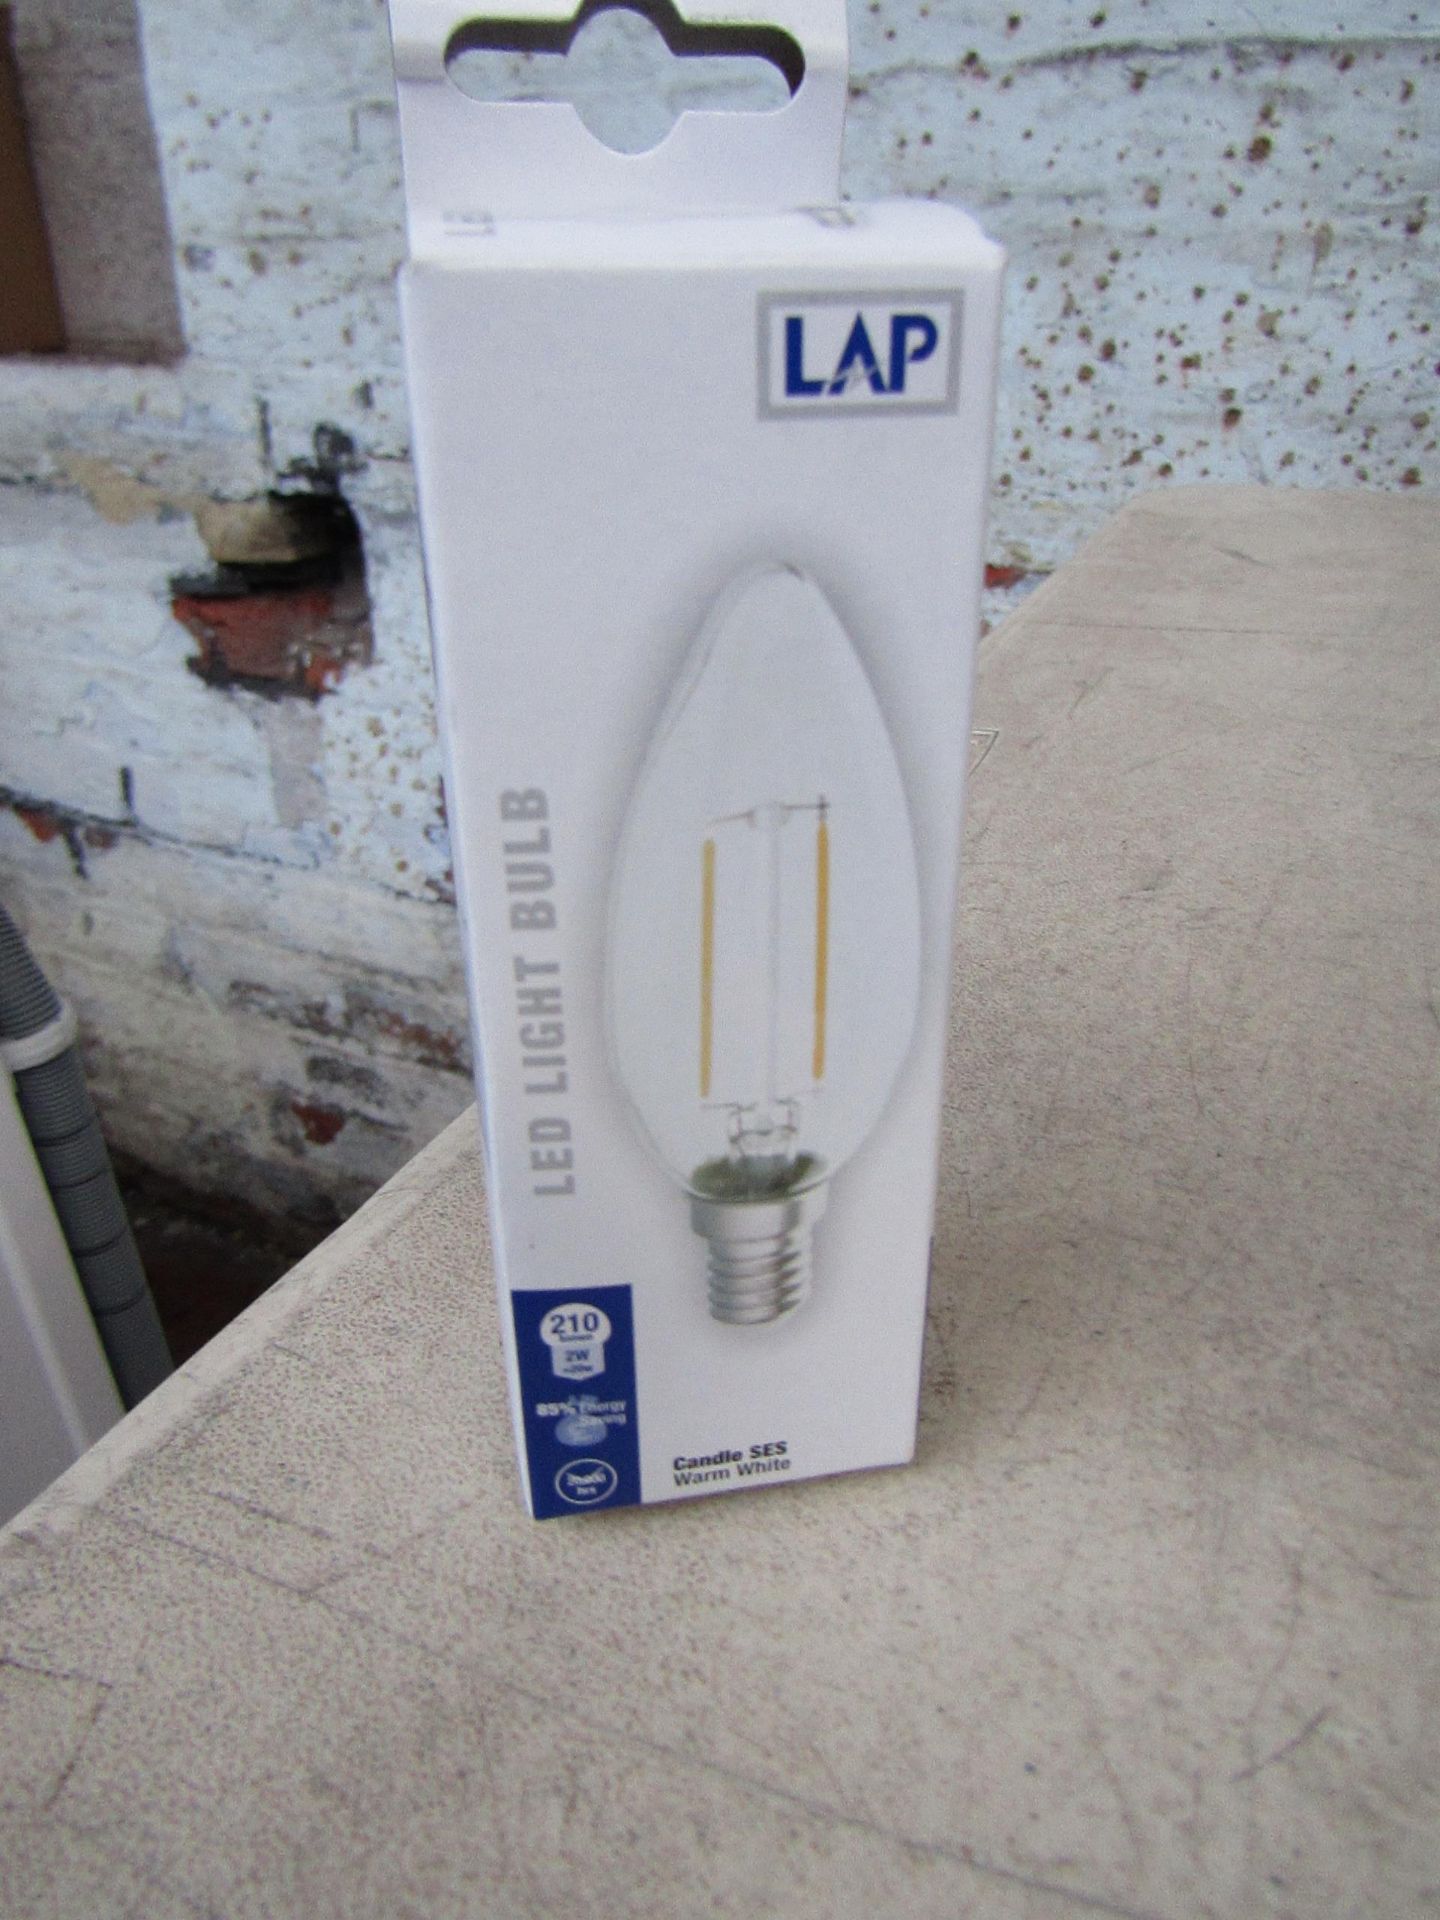 10x LAP candle bulbs, small screw, new and boxed. SES